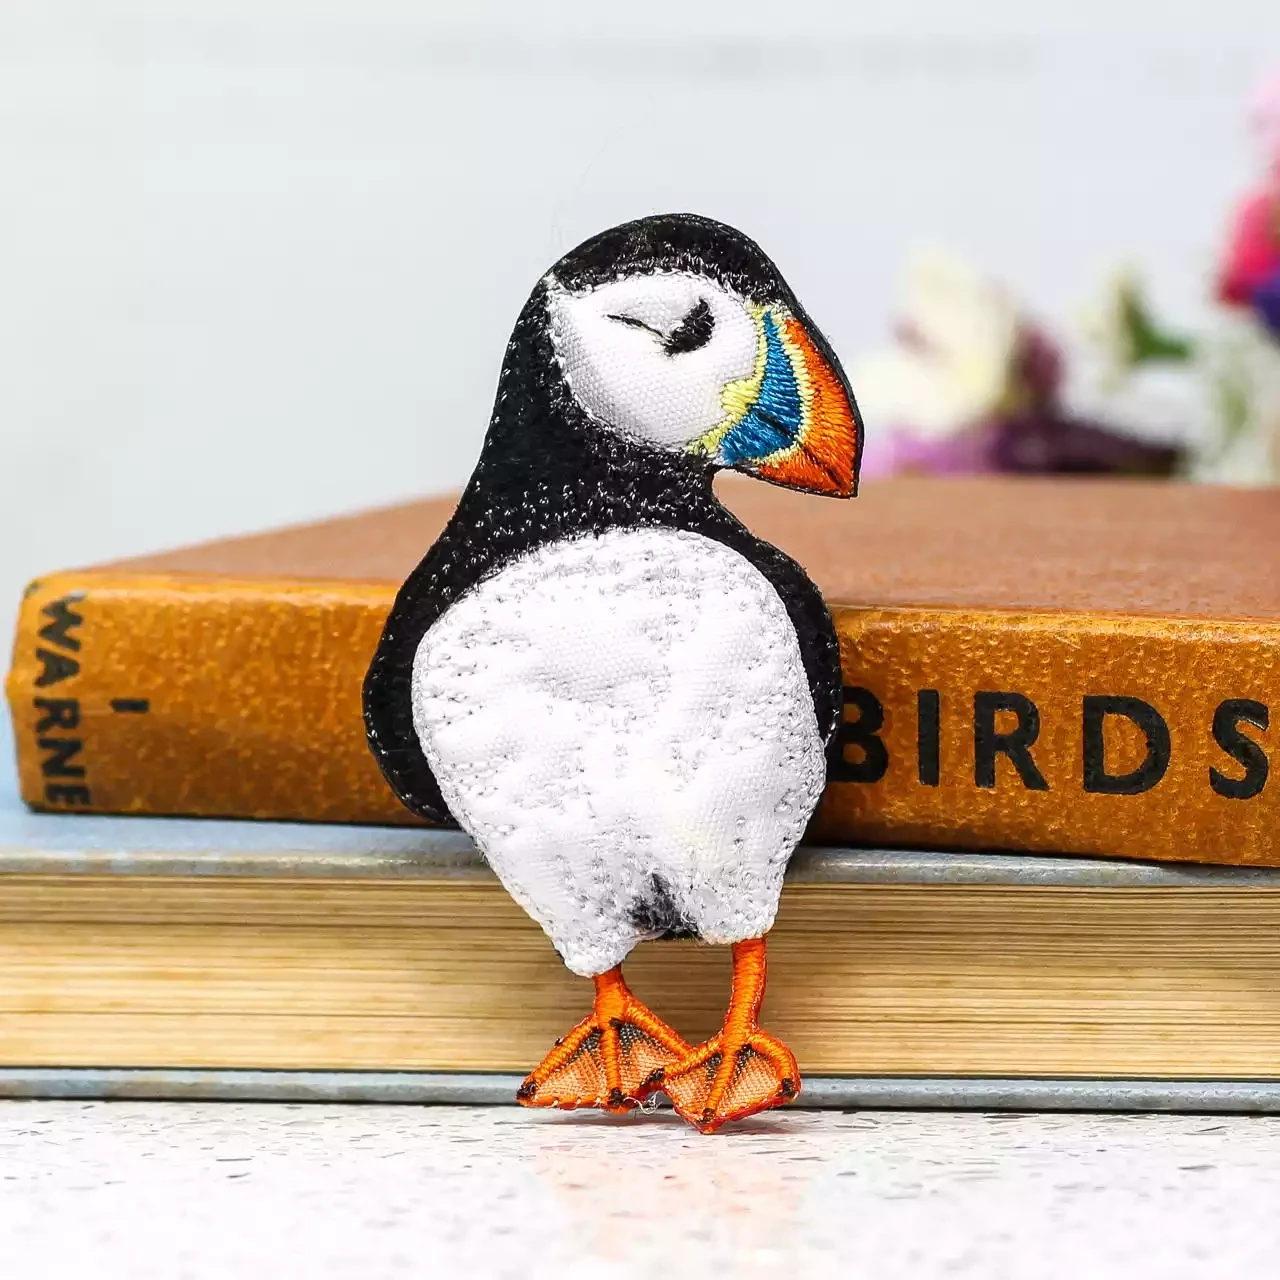 Embroidered Fabric Brooch - Puffin by Vikki Lafford Garside